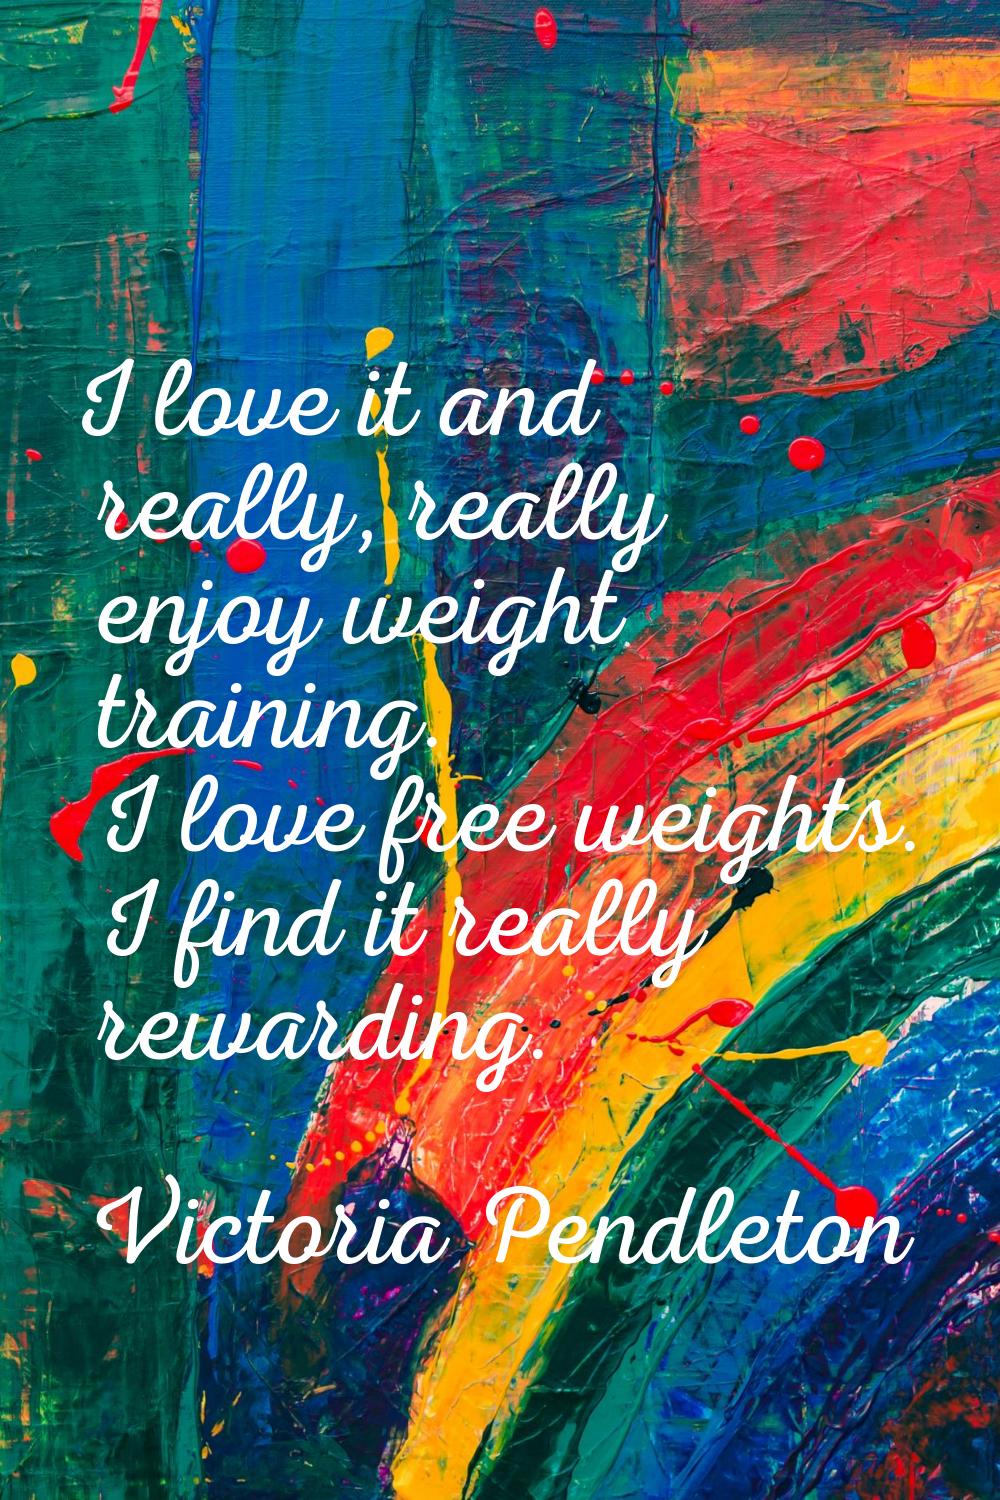 I love it and really, really enjoy weight training. I love free weights. I find it really rewarding